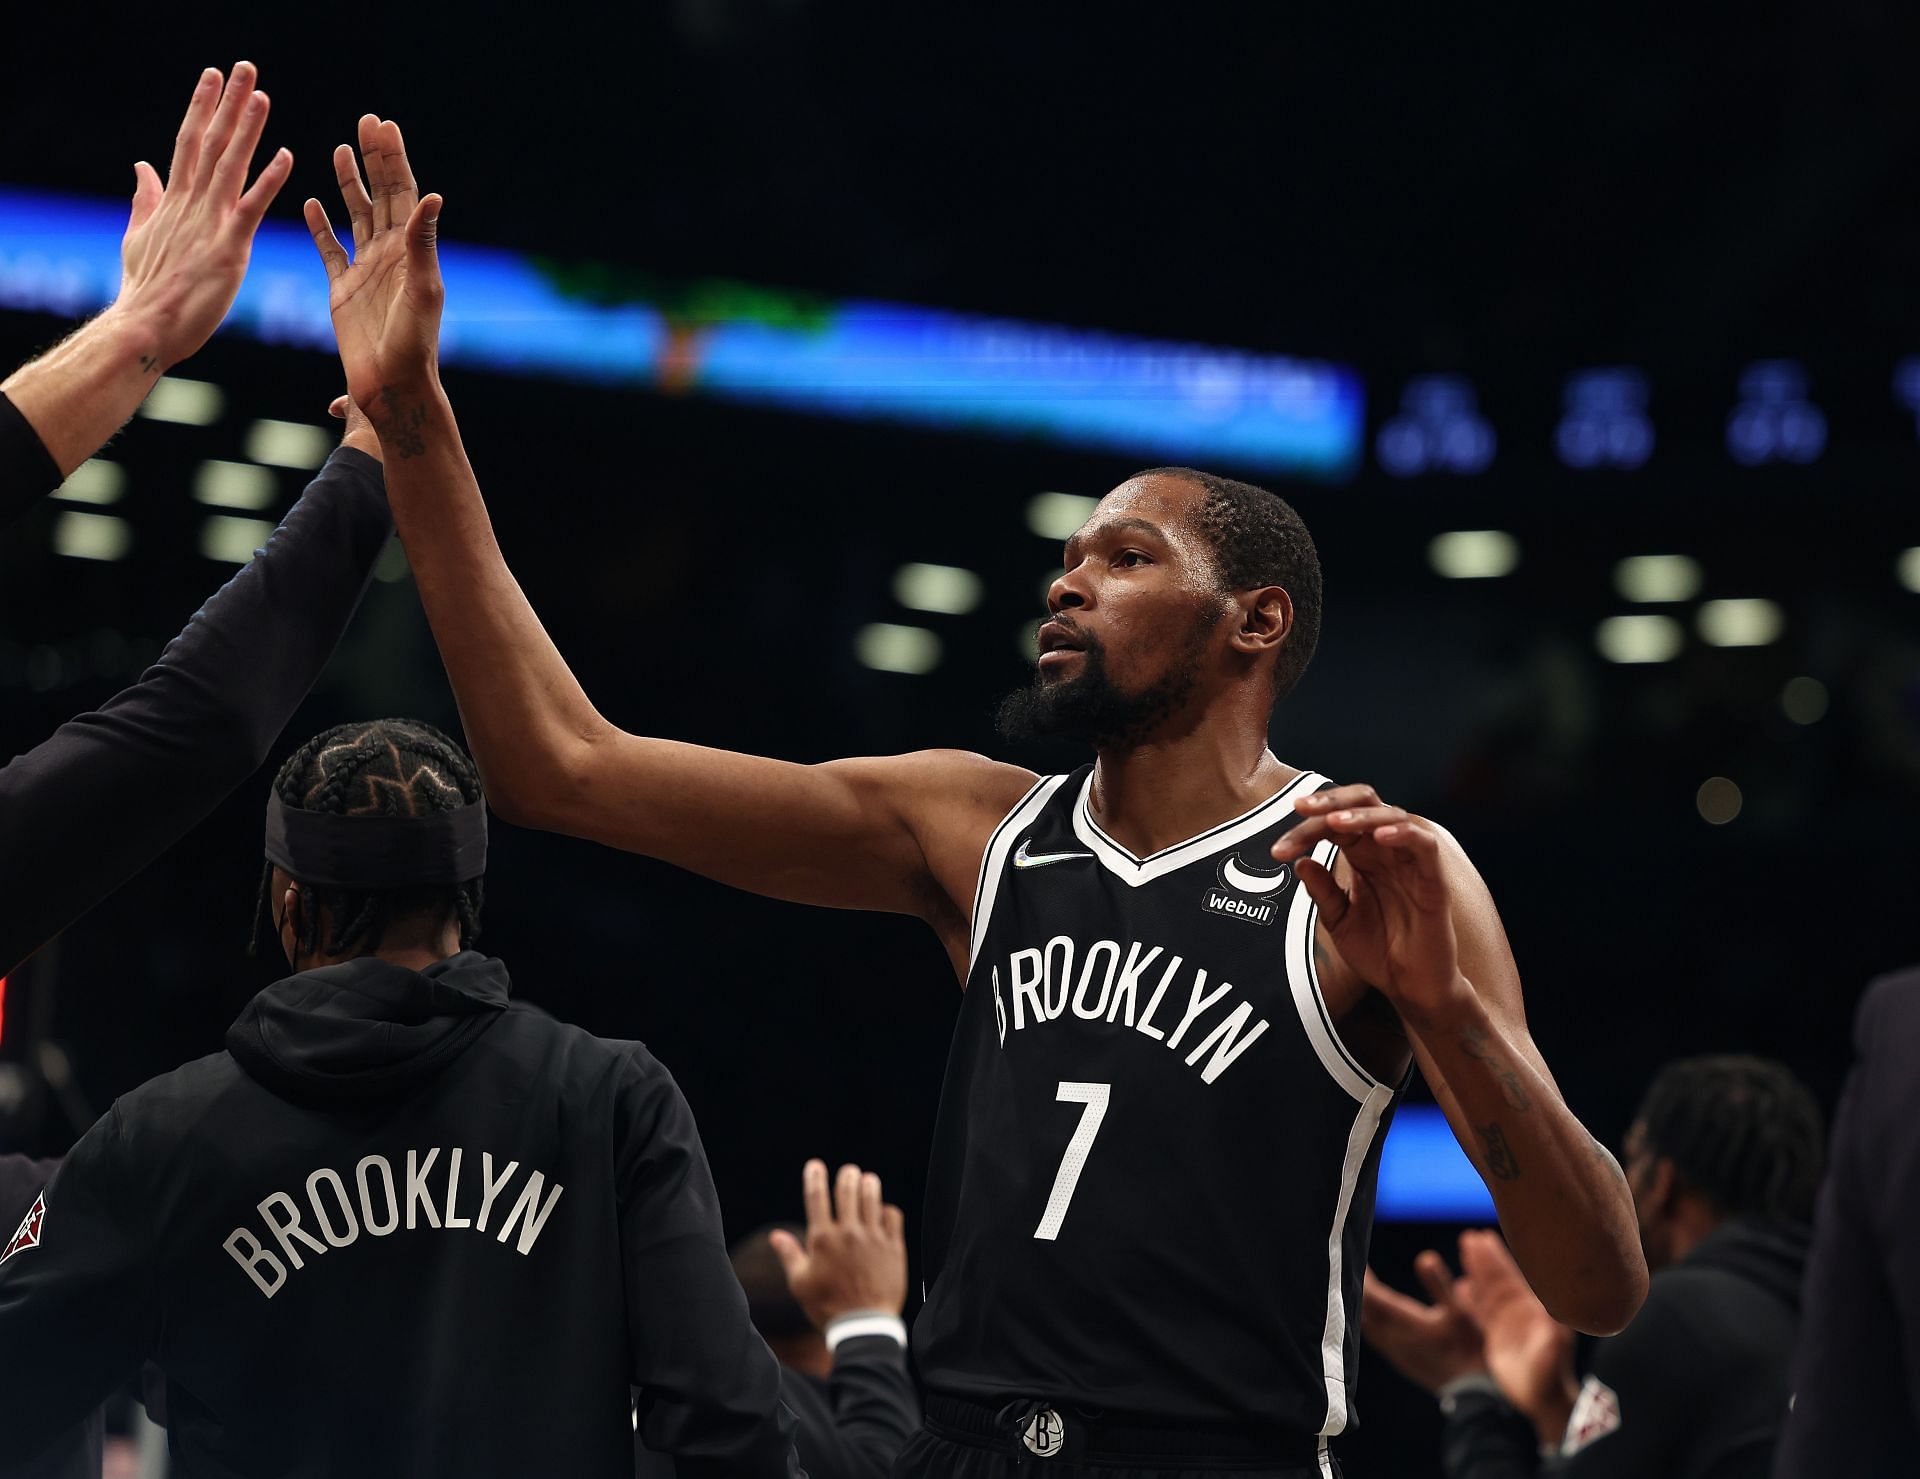 Kevin Durant of the Brooklyn Nets celebrates a basket against the New Orleans Pelicans on Jan. 15 in New York City.